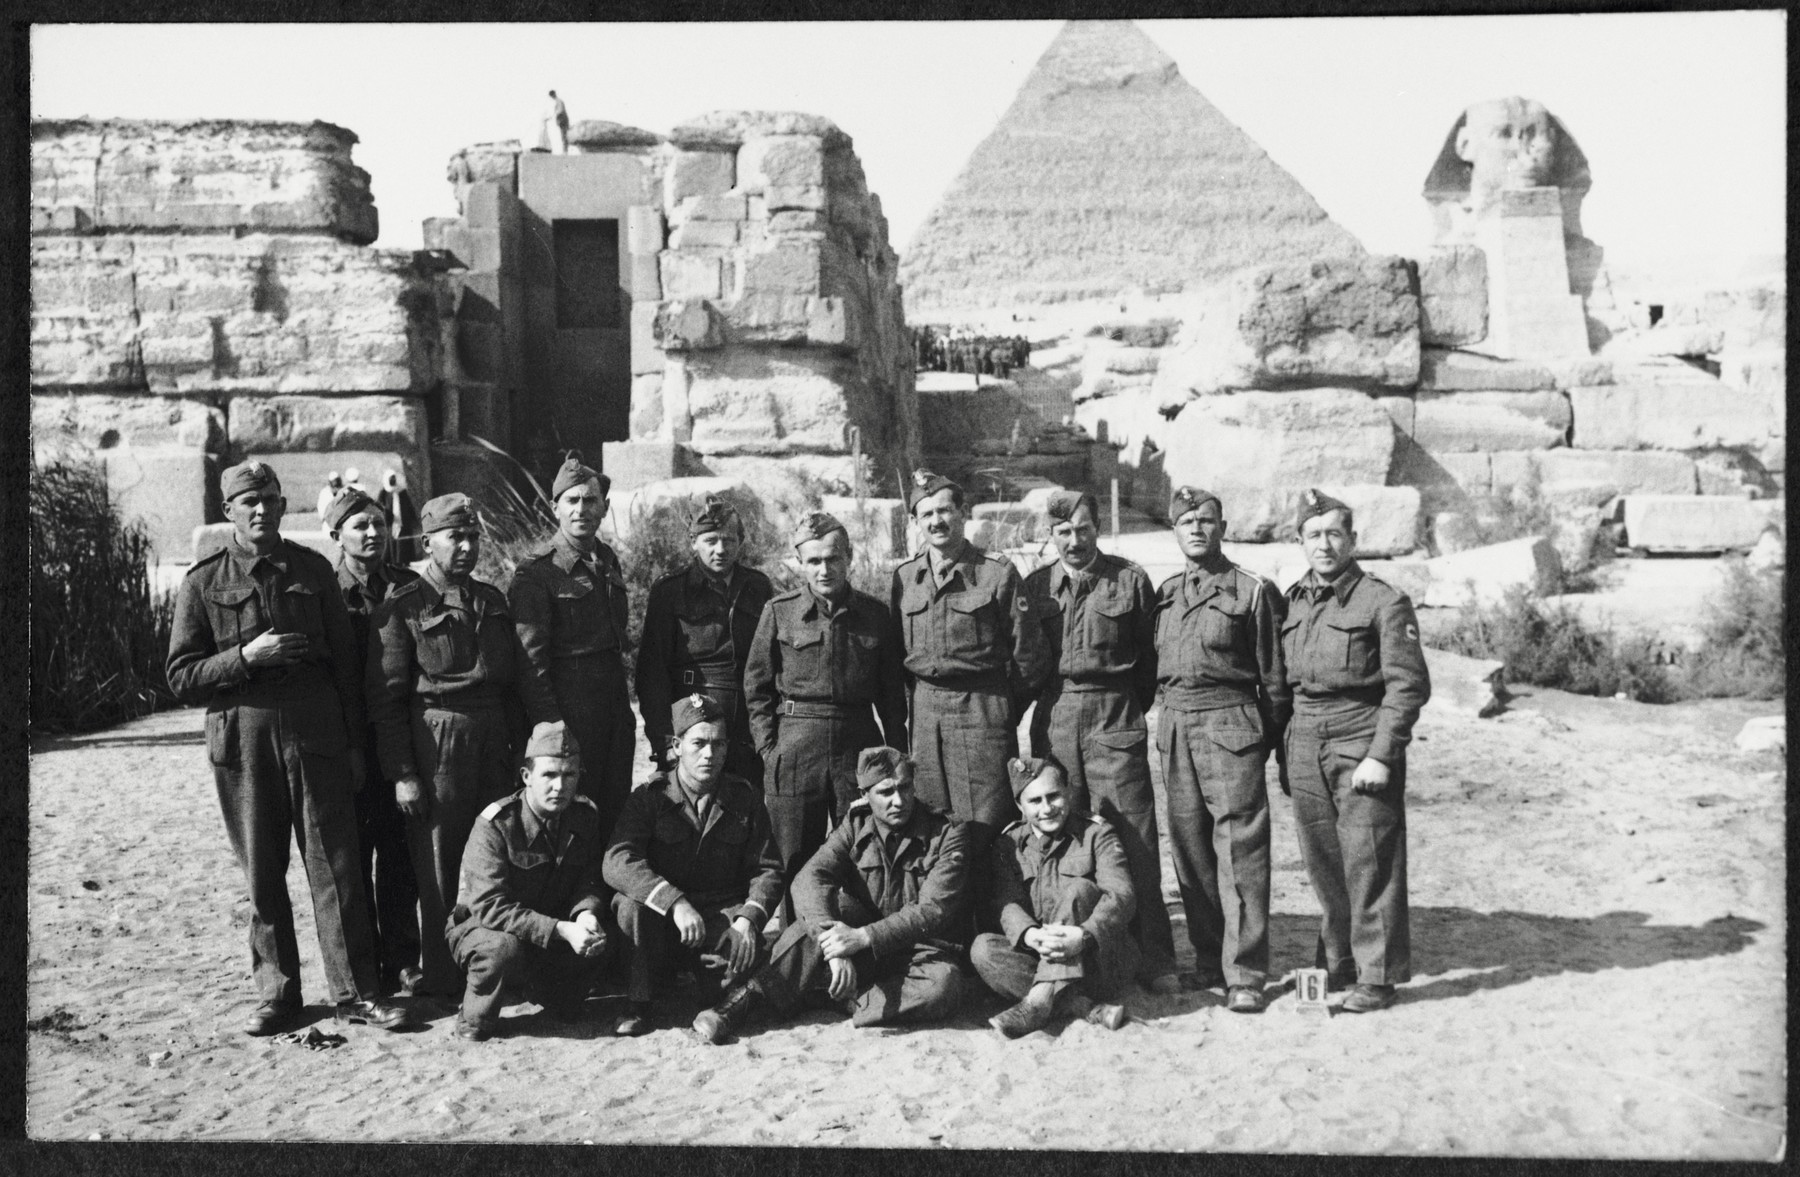 Group portrait of members of the 2nd Polish Corps (Anders Army) during an excursion to the Sphinx in the Giza plateau near Cairo, Egypt, where they were stationed in the winter of 1944.

Among those pictured are Markus Rosenzweig (standing fourth from the left), Jan Wysoki (sitting on the far right), and his friend  Bolek Stankiewicz (standing second from right).